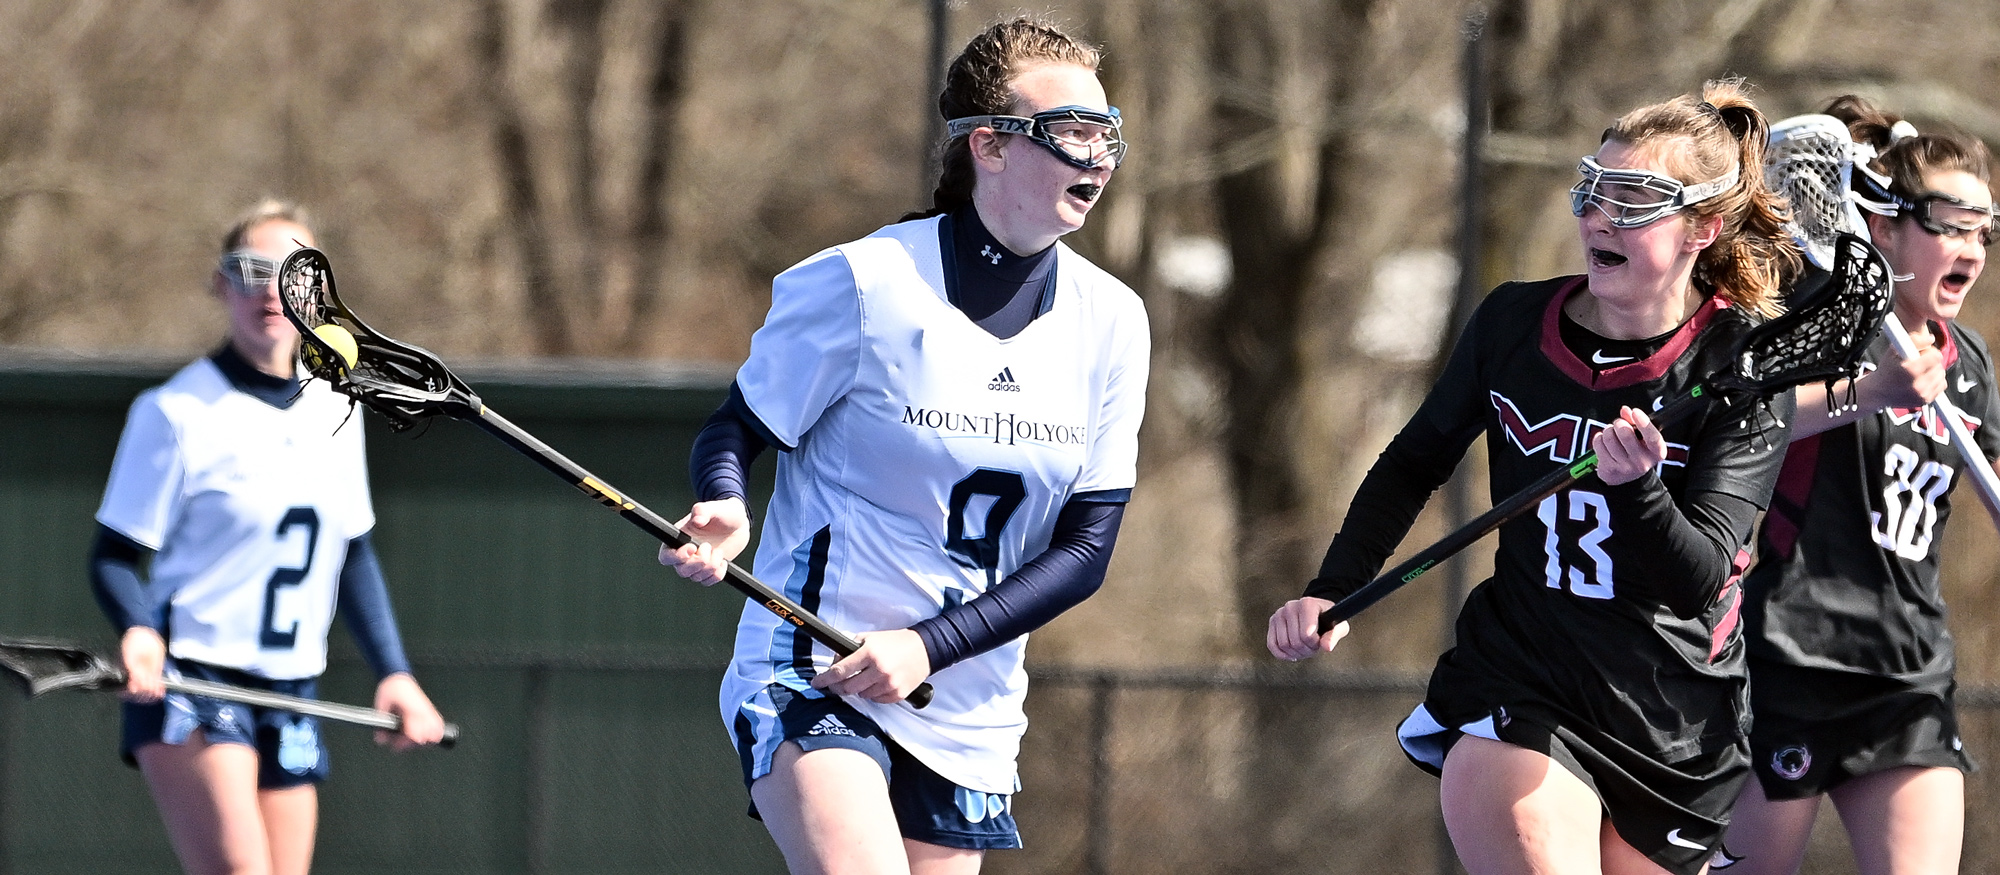 Sophomore captain Ella Phillips scored three goals in Mount Holyoke's 16-11 loss at Clark University on April 26, 2023, in the Lyons' season finale. (RJB Sports file photo)